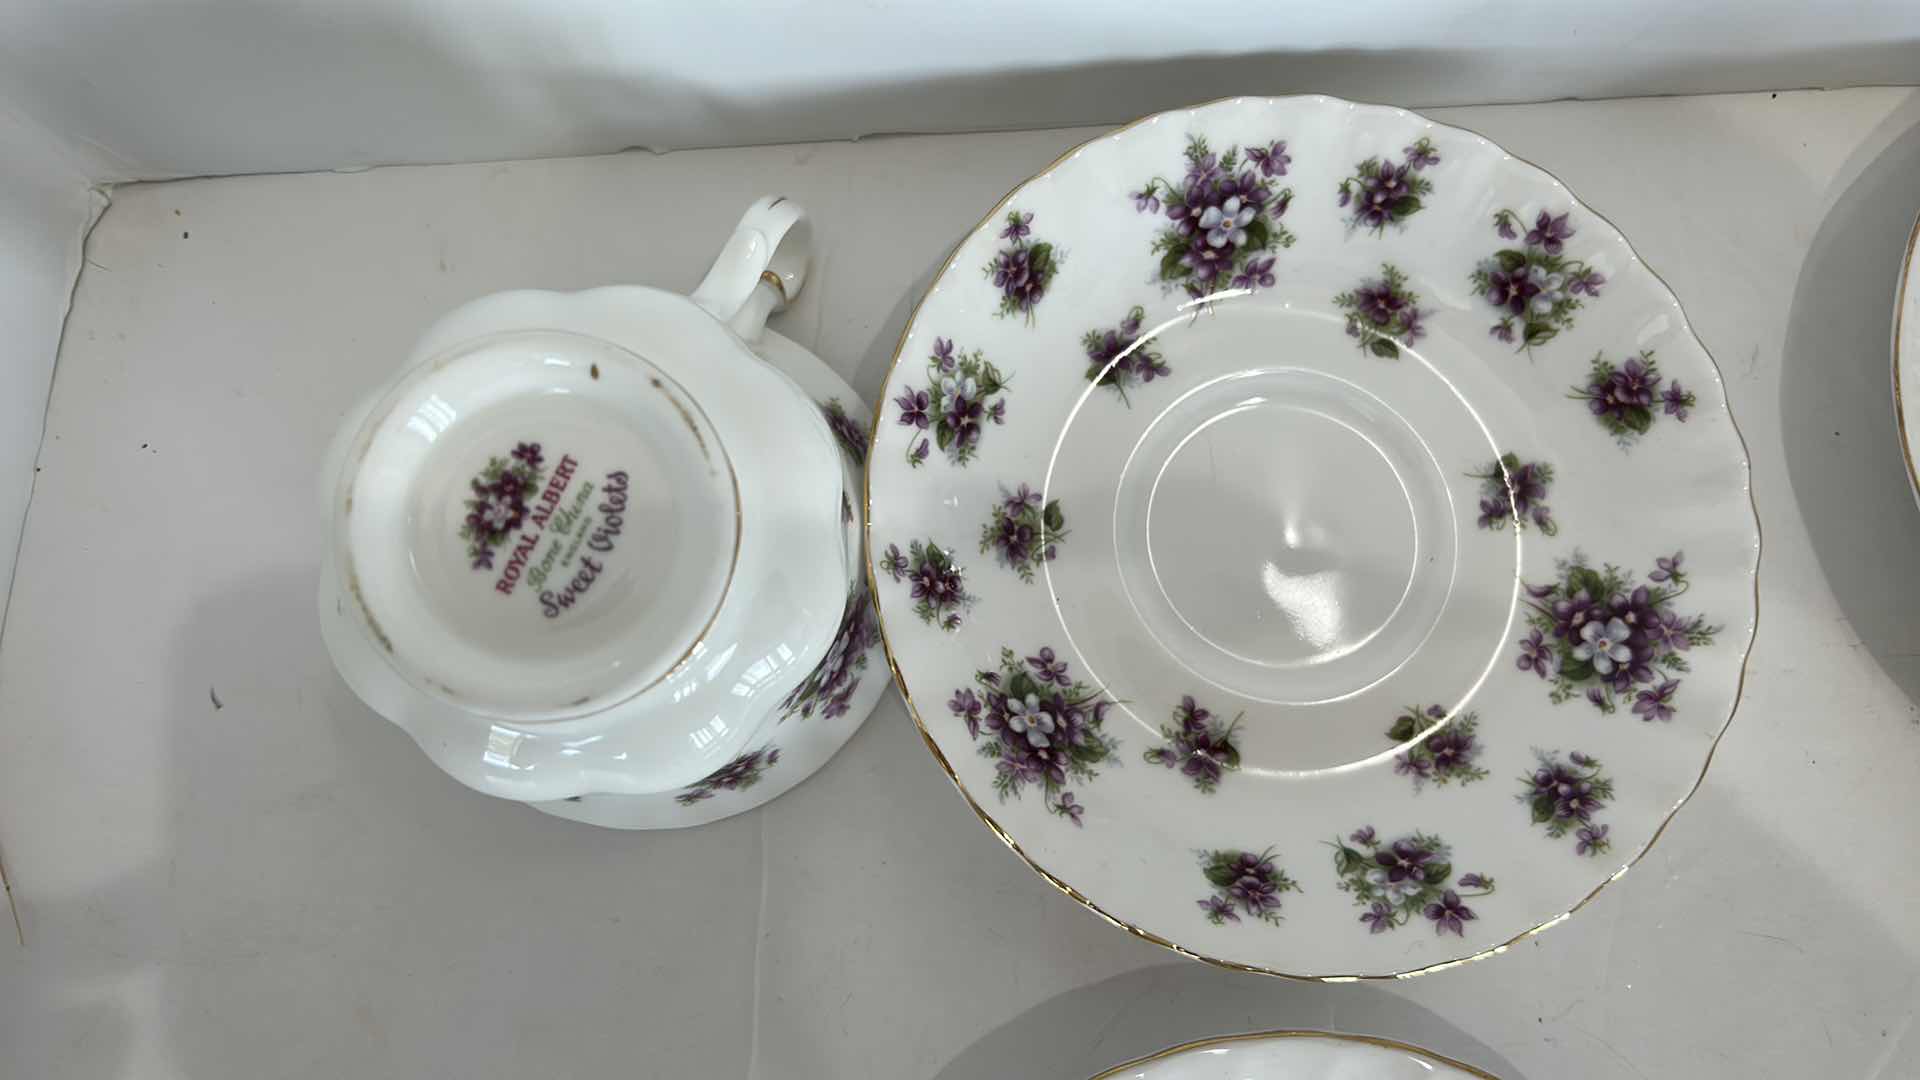 Photo 7 of 3 COLLECTIBLE FINE PORCELAIN TEACUPS AND SAUCERS